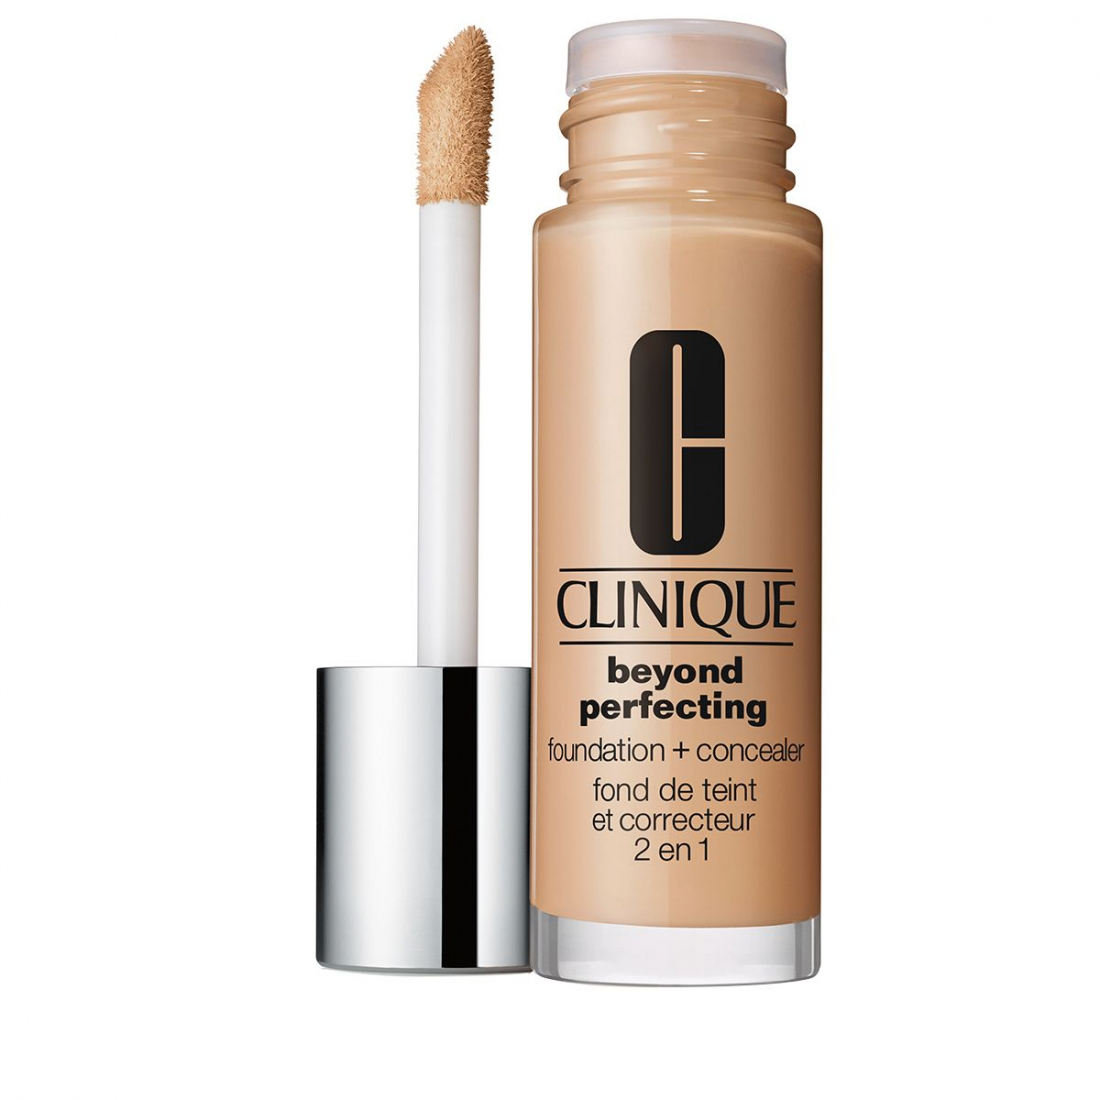 'Beyond Perfecting' Foundation + Concealer - 09 Neutral 30 ml